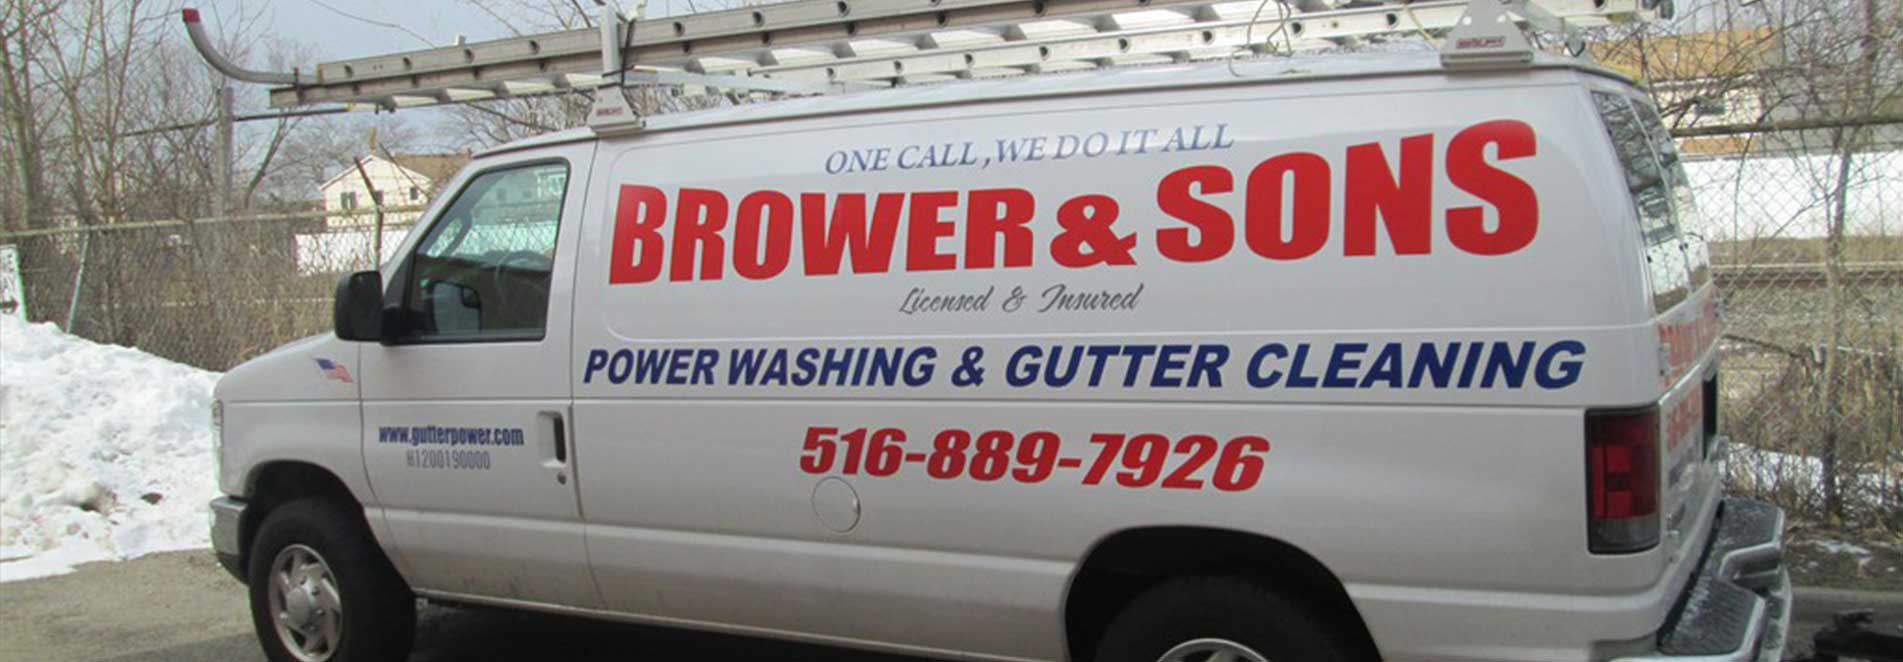 Brower & Sons truck